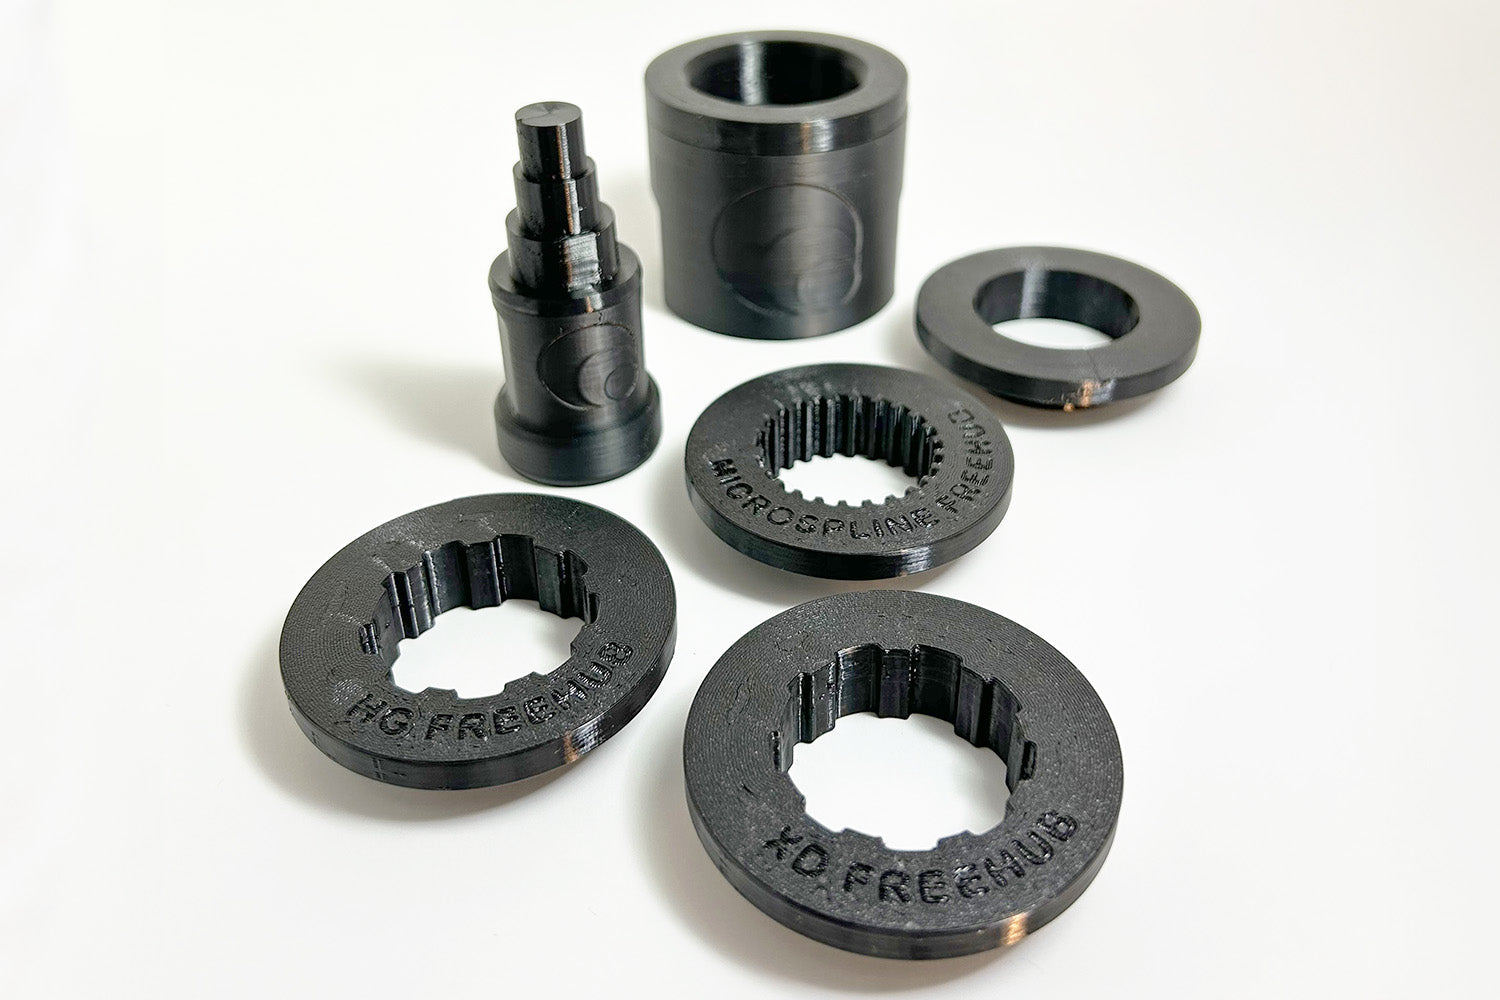 XD, HG, Microspline and Generic Freehub Adaptors made of rigid "soft touch" thermoplastic. Made to be used in conjunction with our Hub Support.